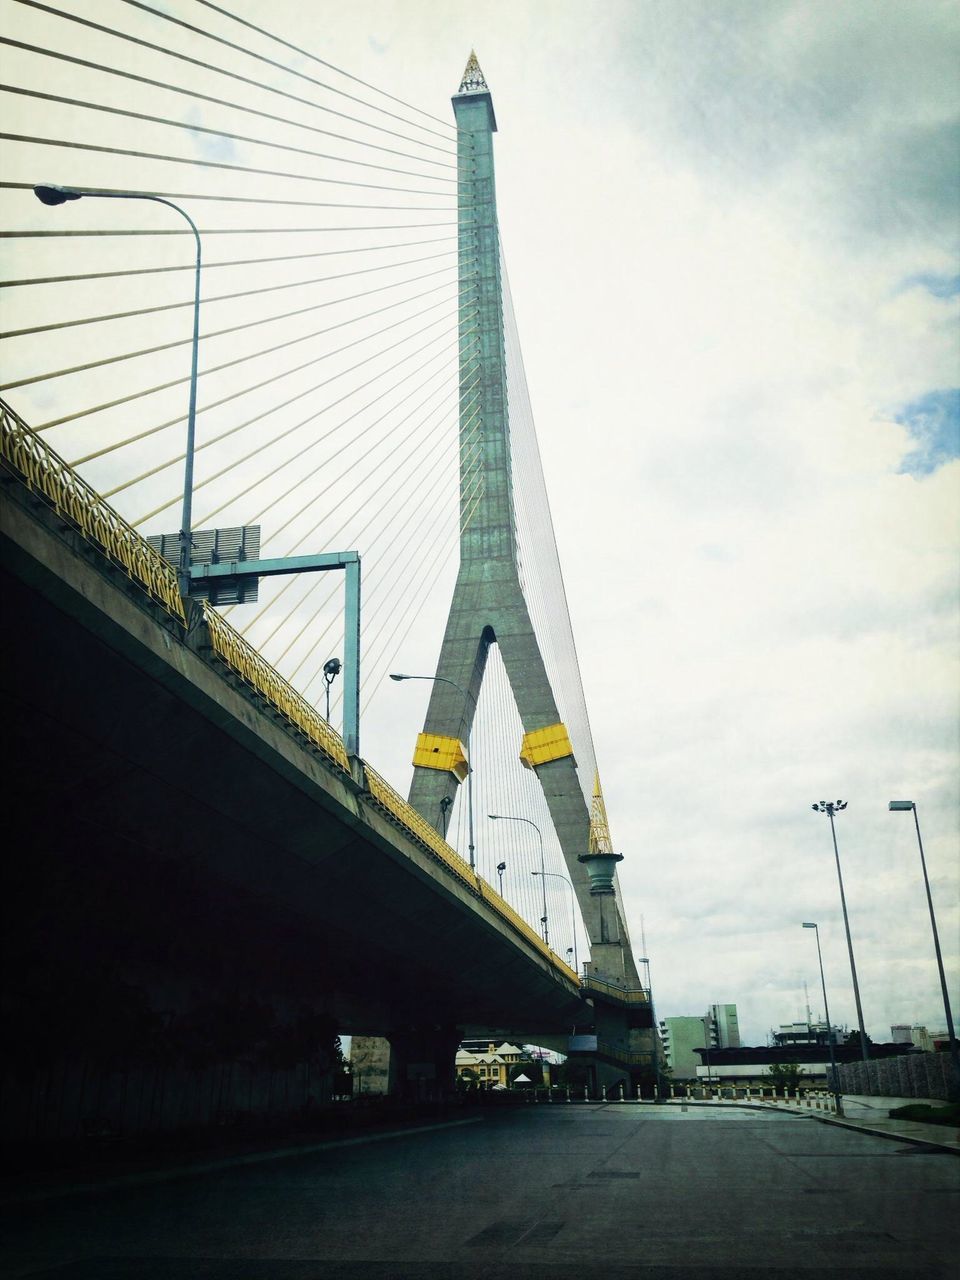 architecture, built structure, transportation, connection, bridge - man made structure, sky, engineering, the way forward, road, cloud - sky, city, building exterior, bridge, suspension bridge, low angle view, cable-stayed bridge, diminishing perspective, long, cloud, outdoors